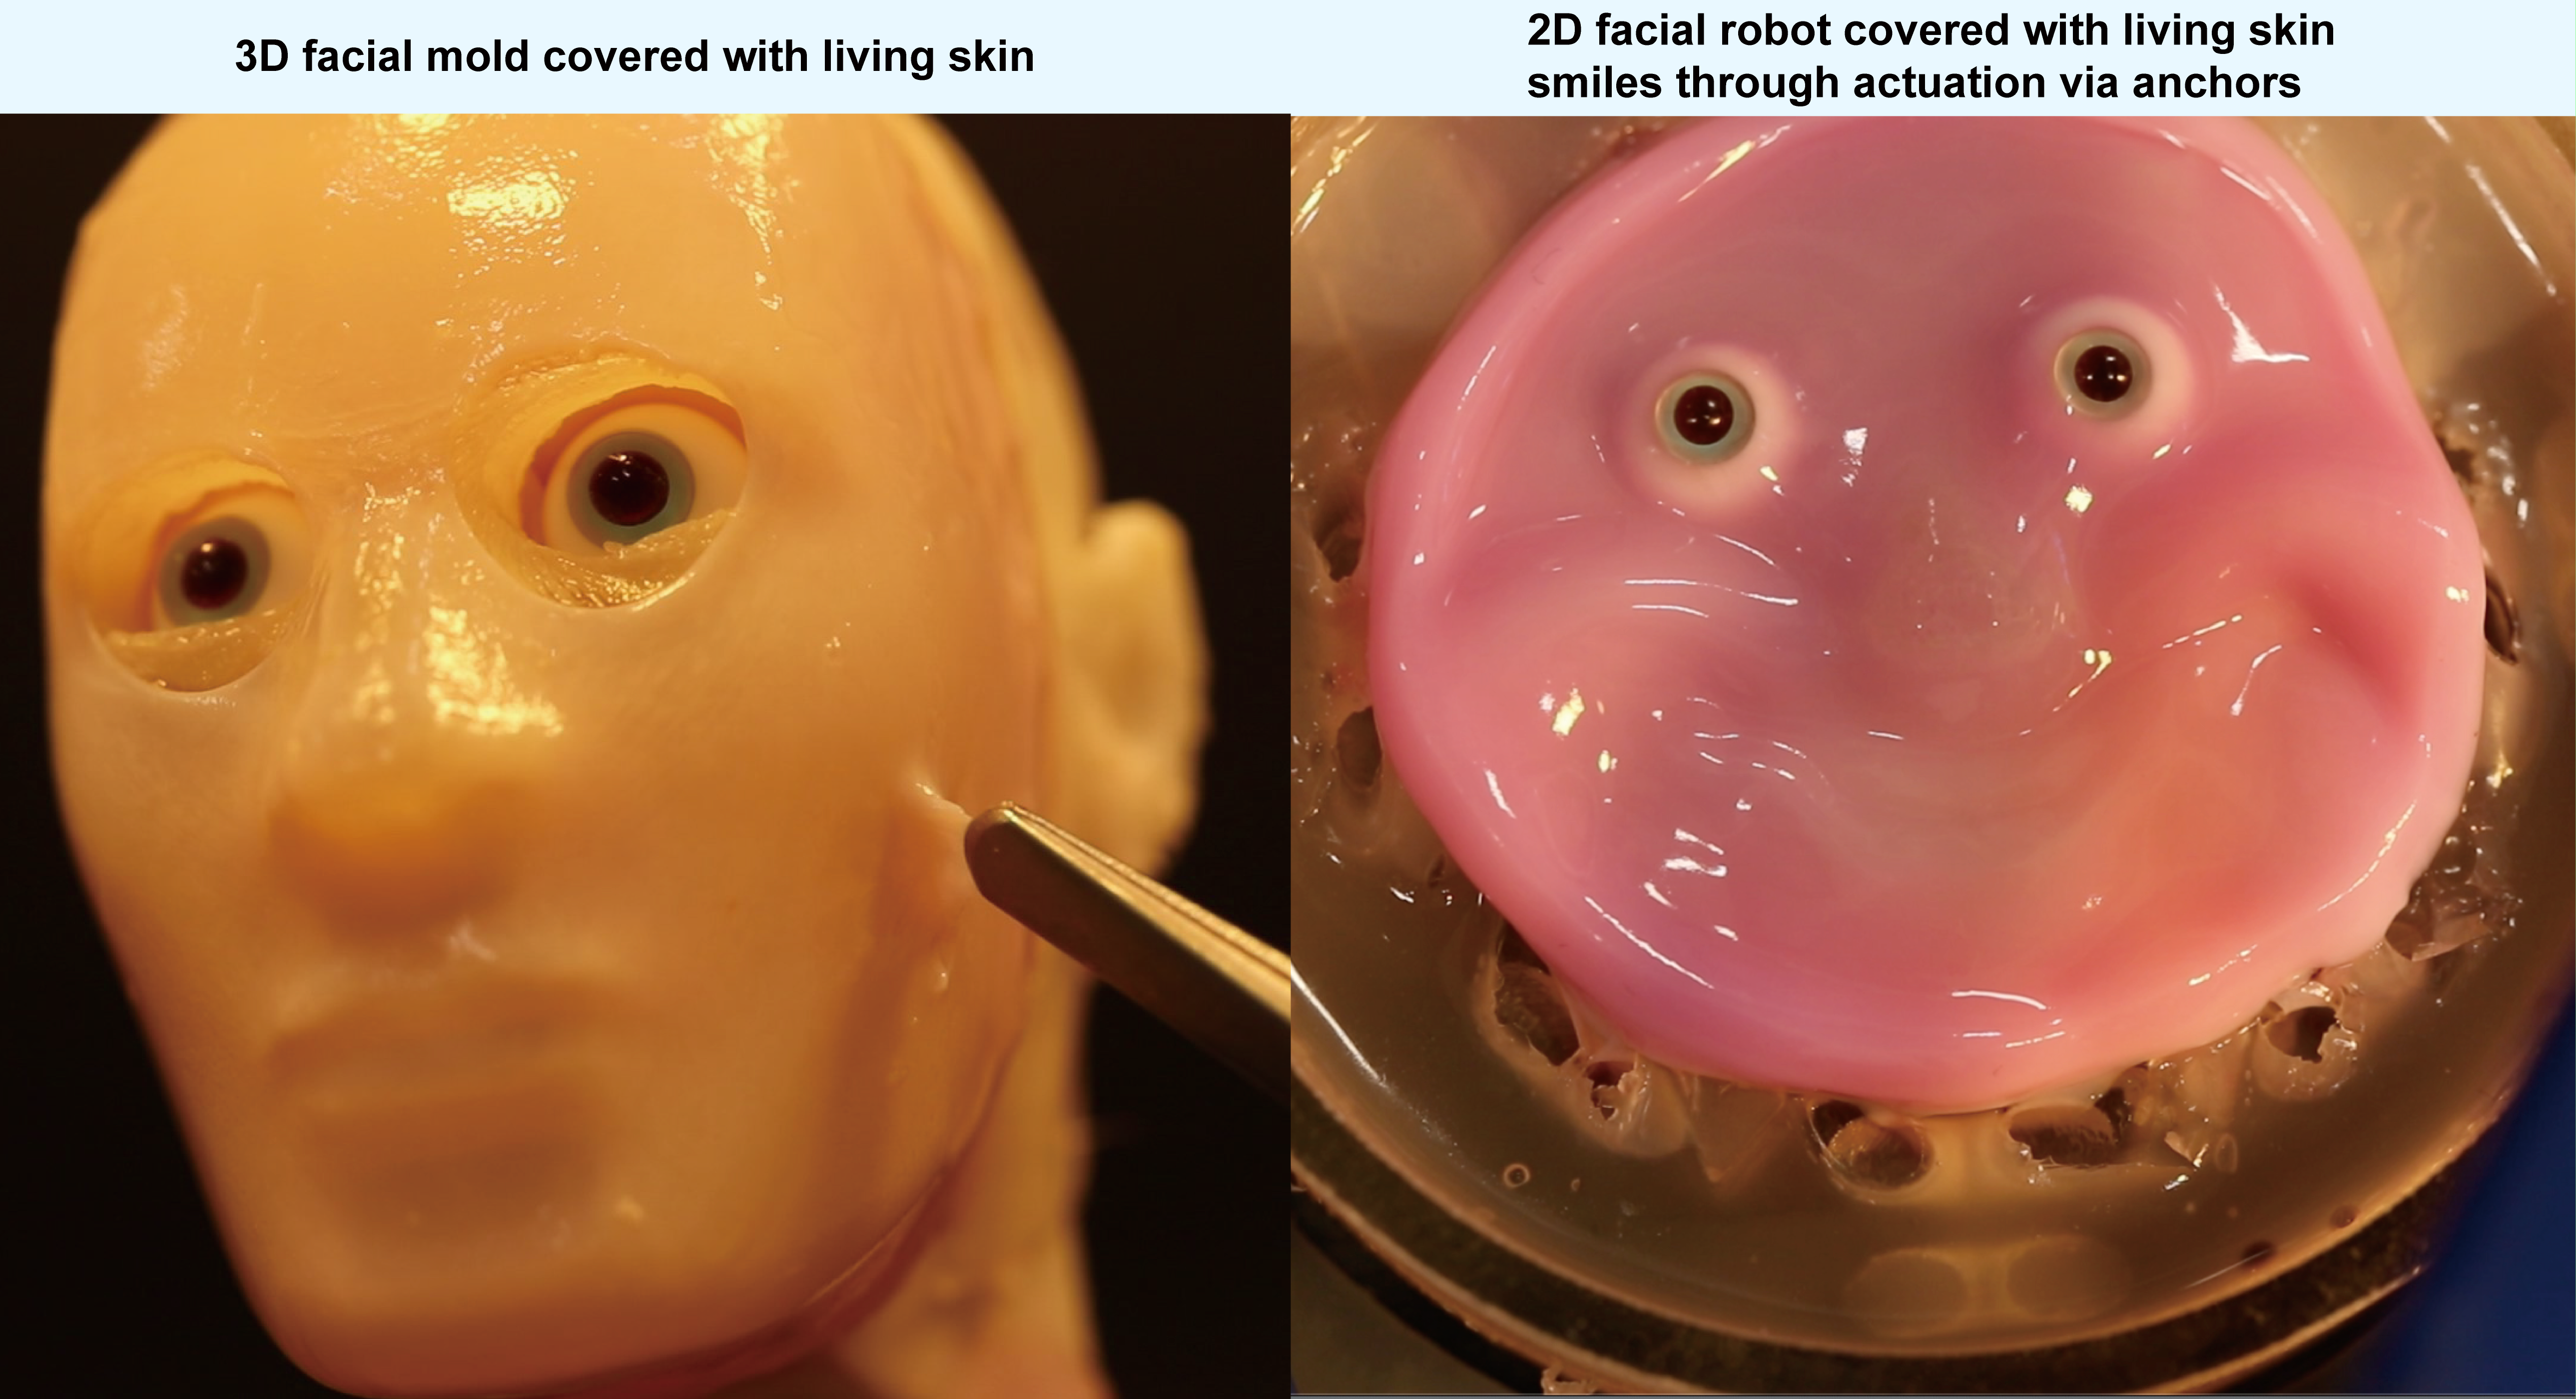 Humanoids with living skin